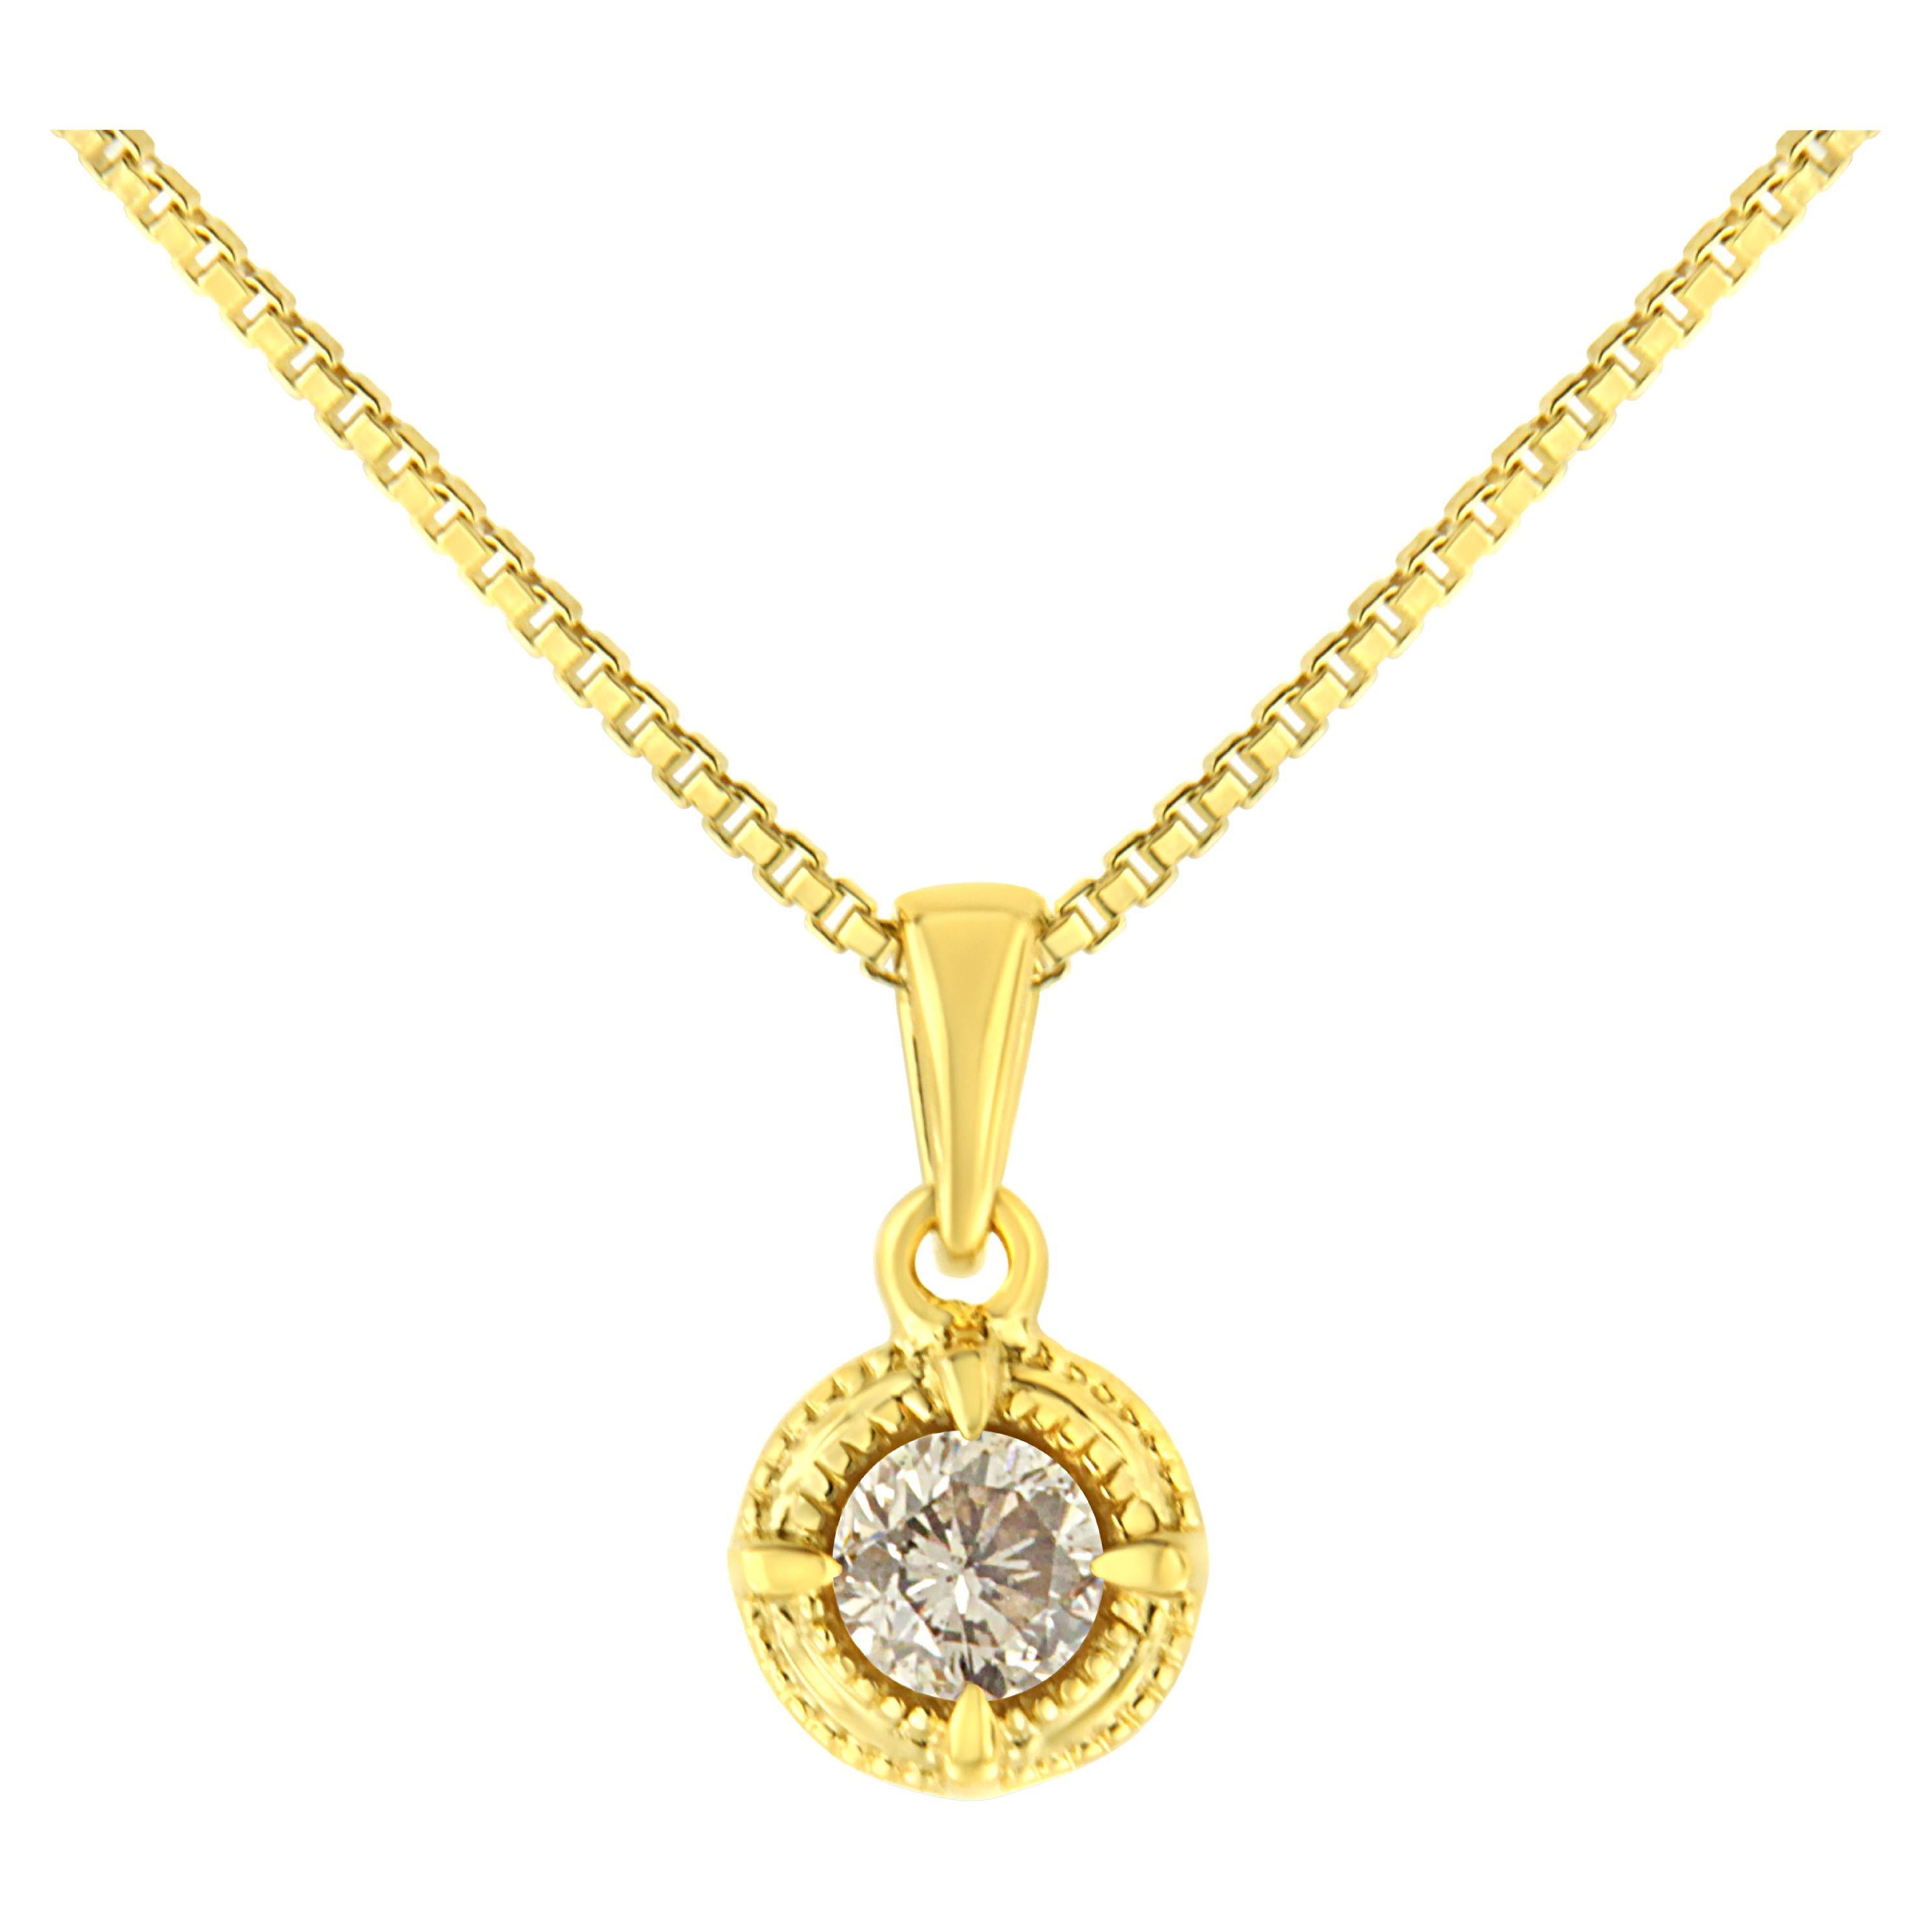 Yellow Gold Plated Sterling Silver 3/4 Carat Diamond Solitaire Pendant Necklace